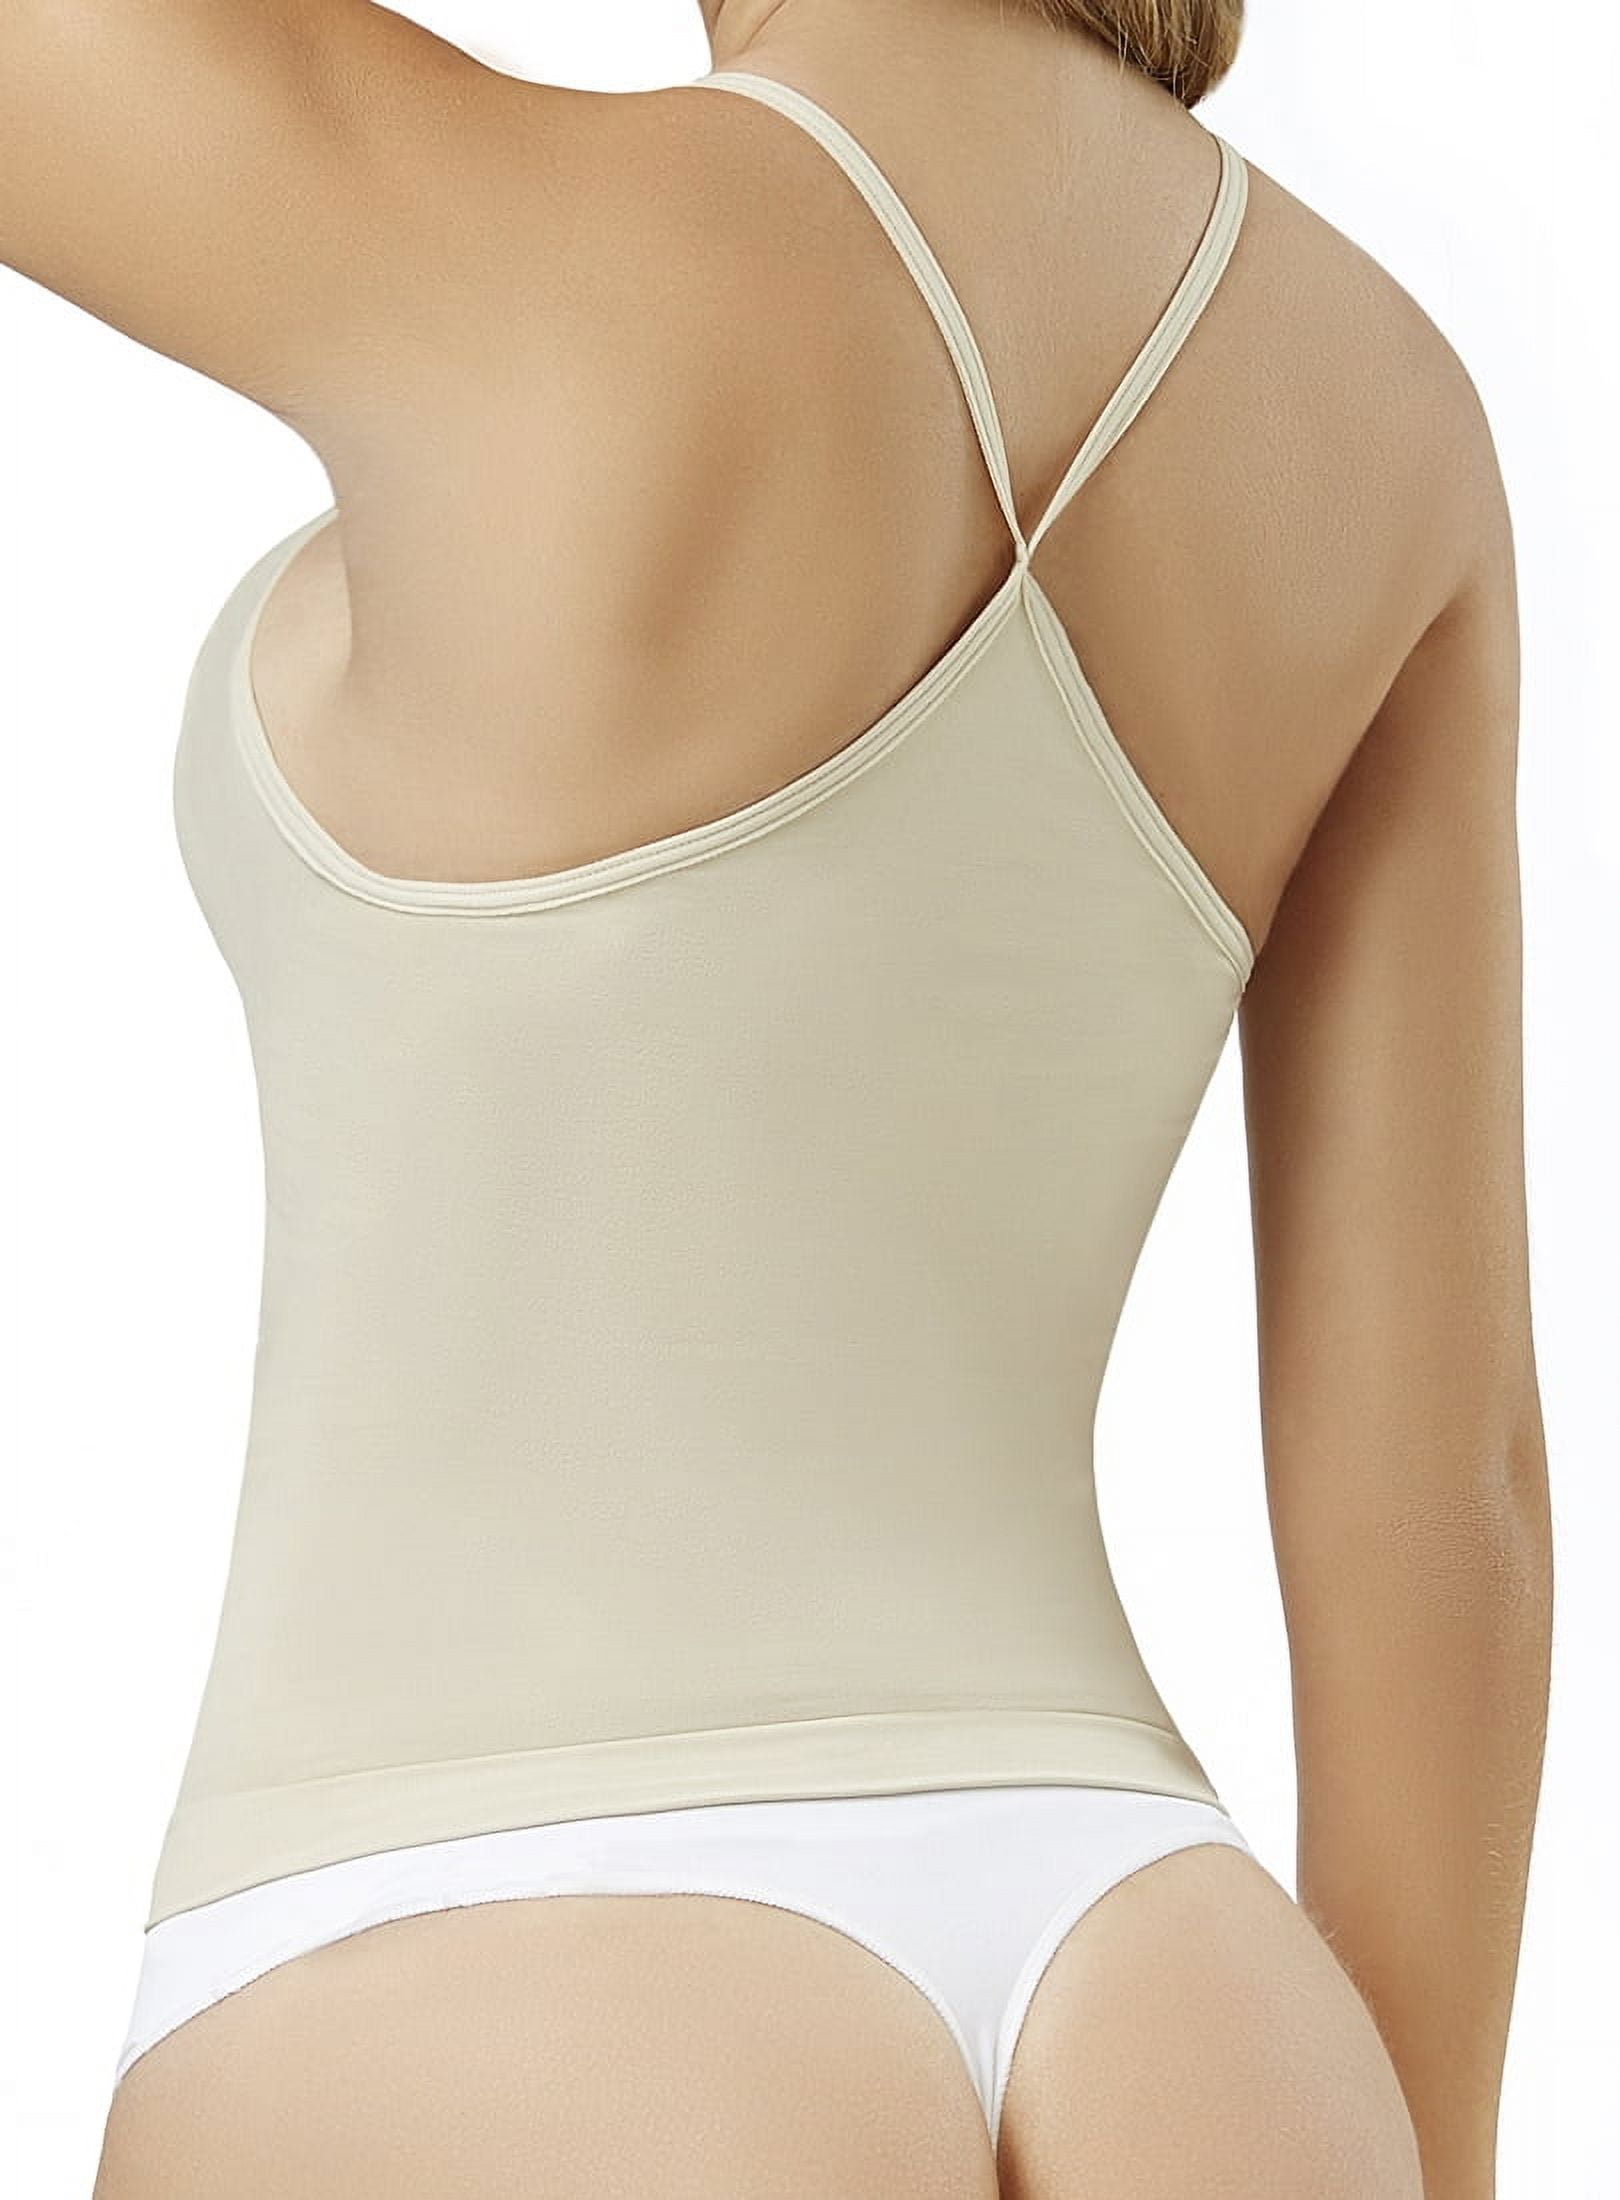 Girdle Shapewear Bodysuit-Faja Colombiana Fresh and Light - Shapewear for  women Seamless Camisole Camisole Blusa Flattens Belly Back Crossed Straps  Fajas Colombianas para mujeres reductoras y moldead 